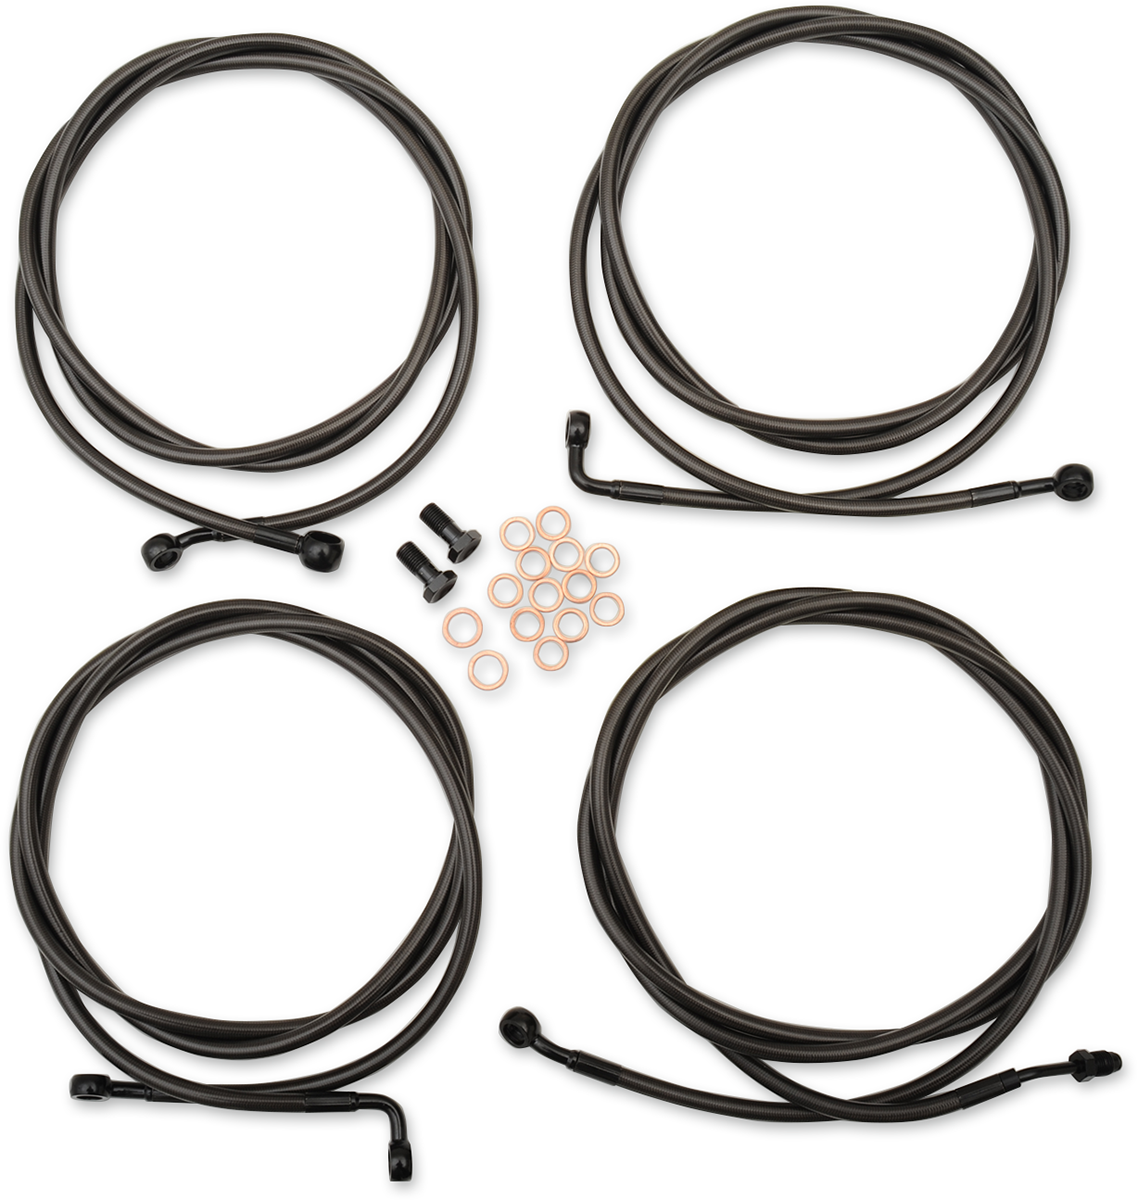 La Choppers Midnight Mini Ape Handlebar ABS Cable Kit 17-19 Harley Touring